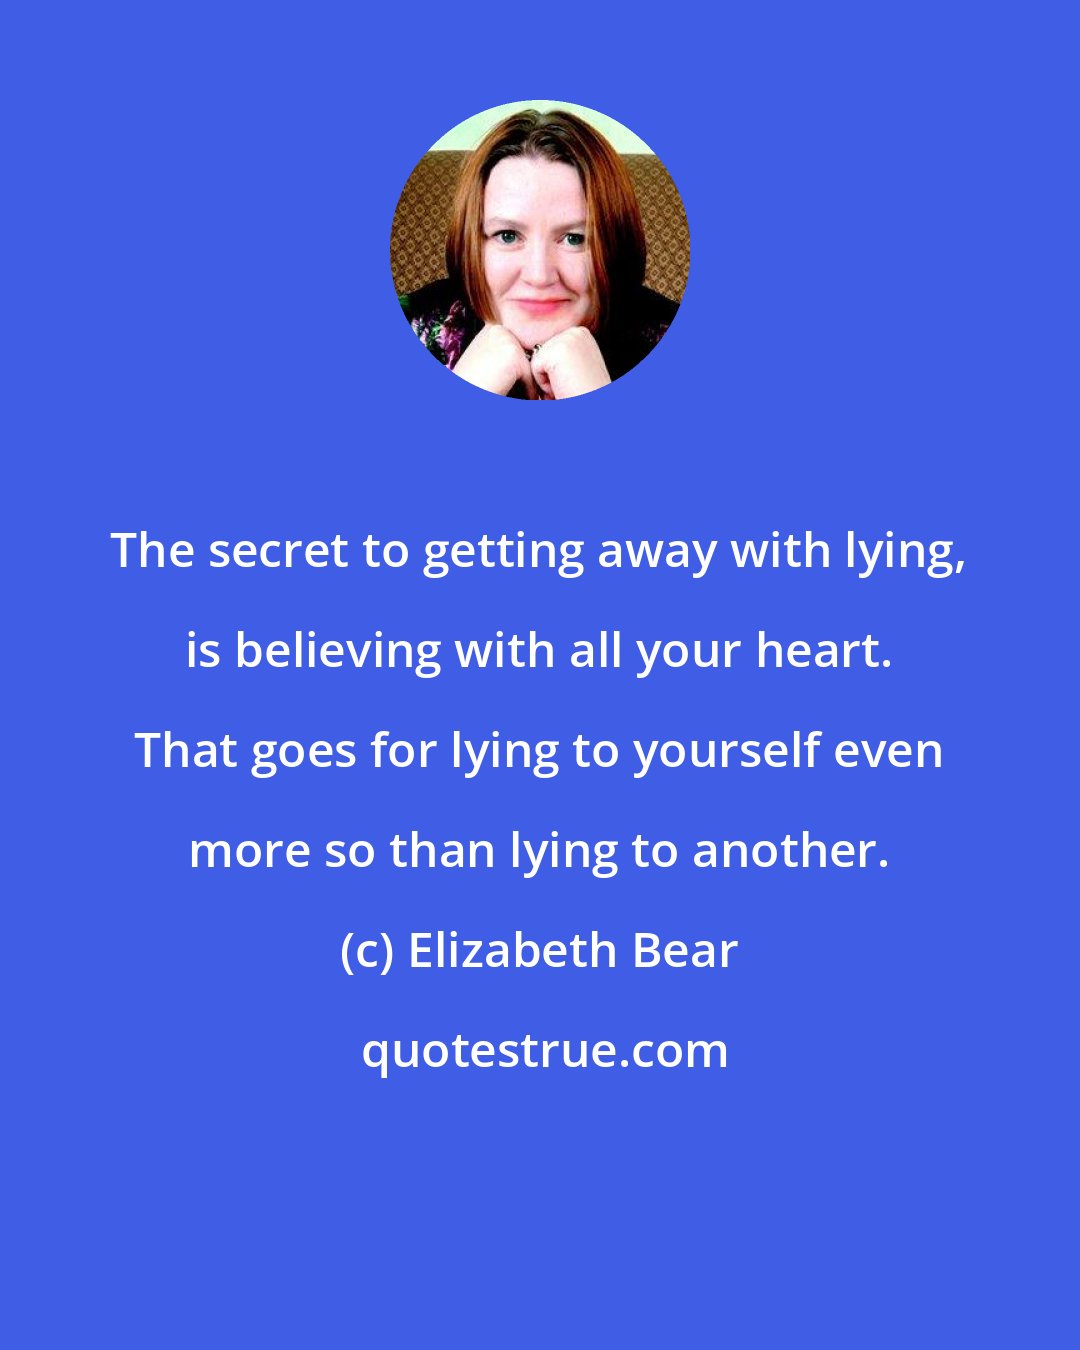 Elizabeth Bear: The secret to getting away with lying, is believing with all your heart. That goes for lying to yourself even more so than lying to another.